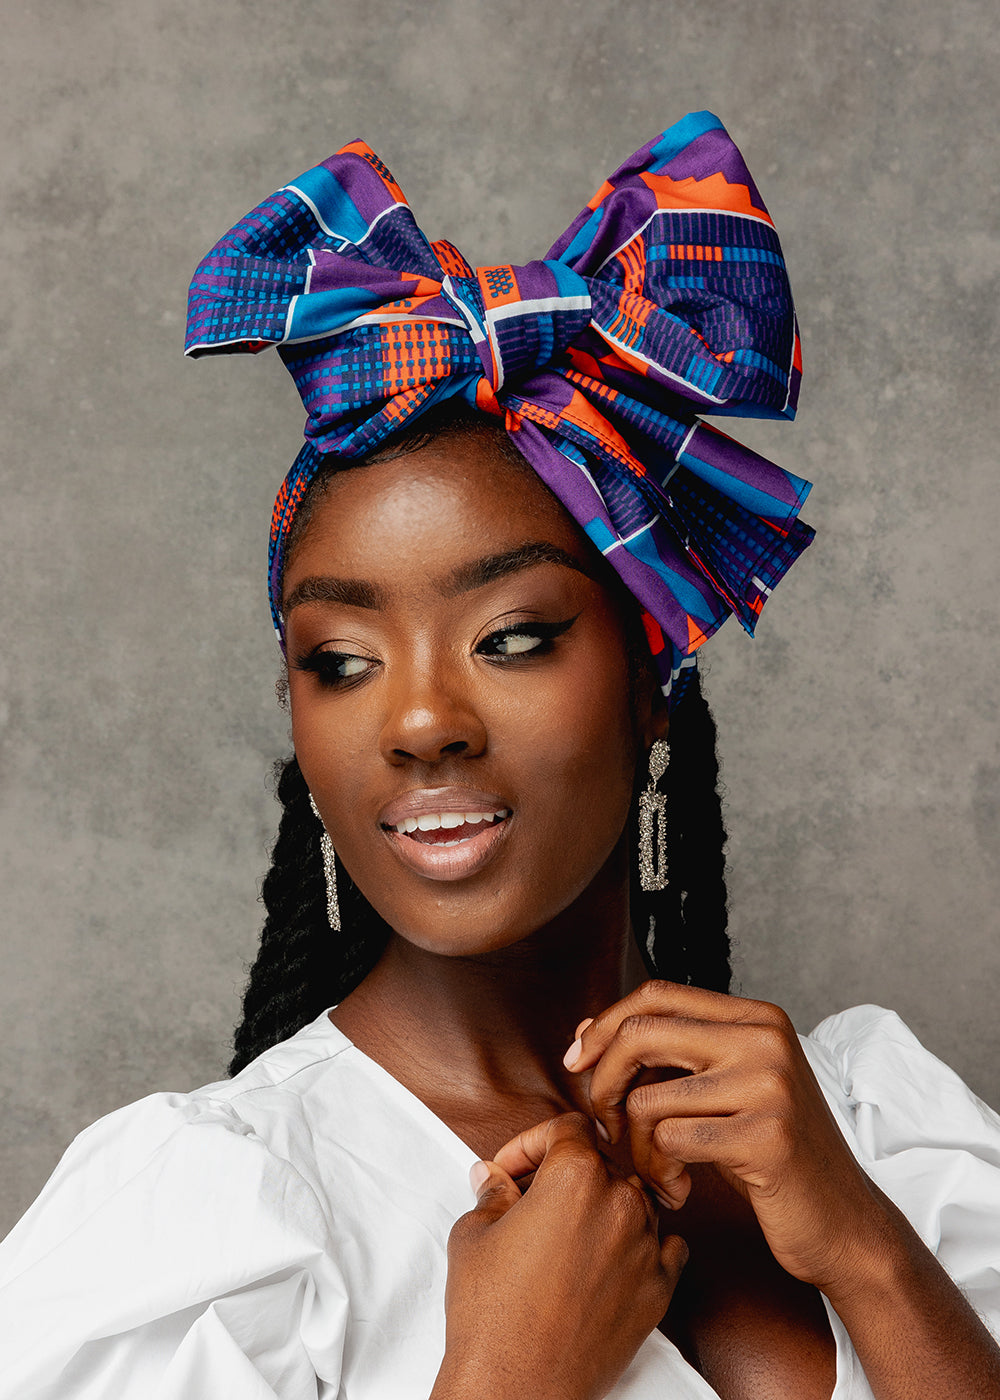 How to Wrap & Style Your African Print Head Scarf